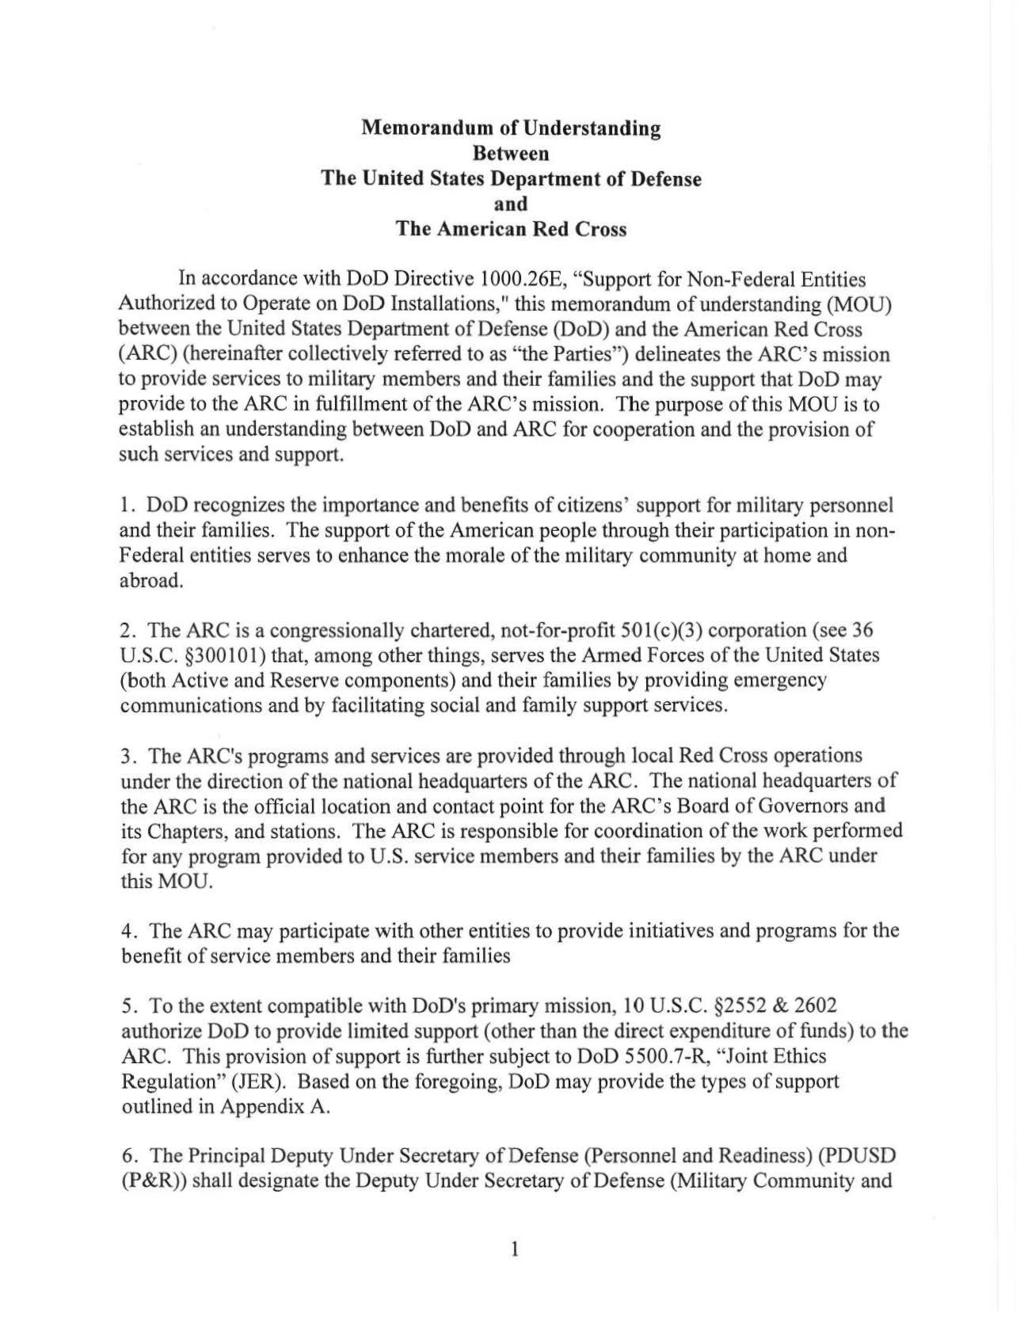 Memorandum of Understanding Between The United States Department of Defense and The American Red Cross In accordance with DoD Directive 1000.